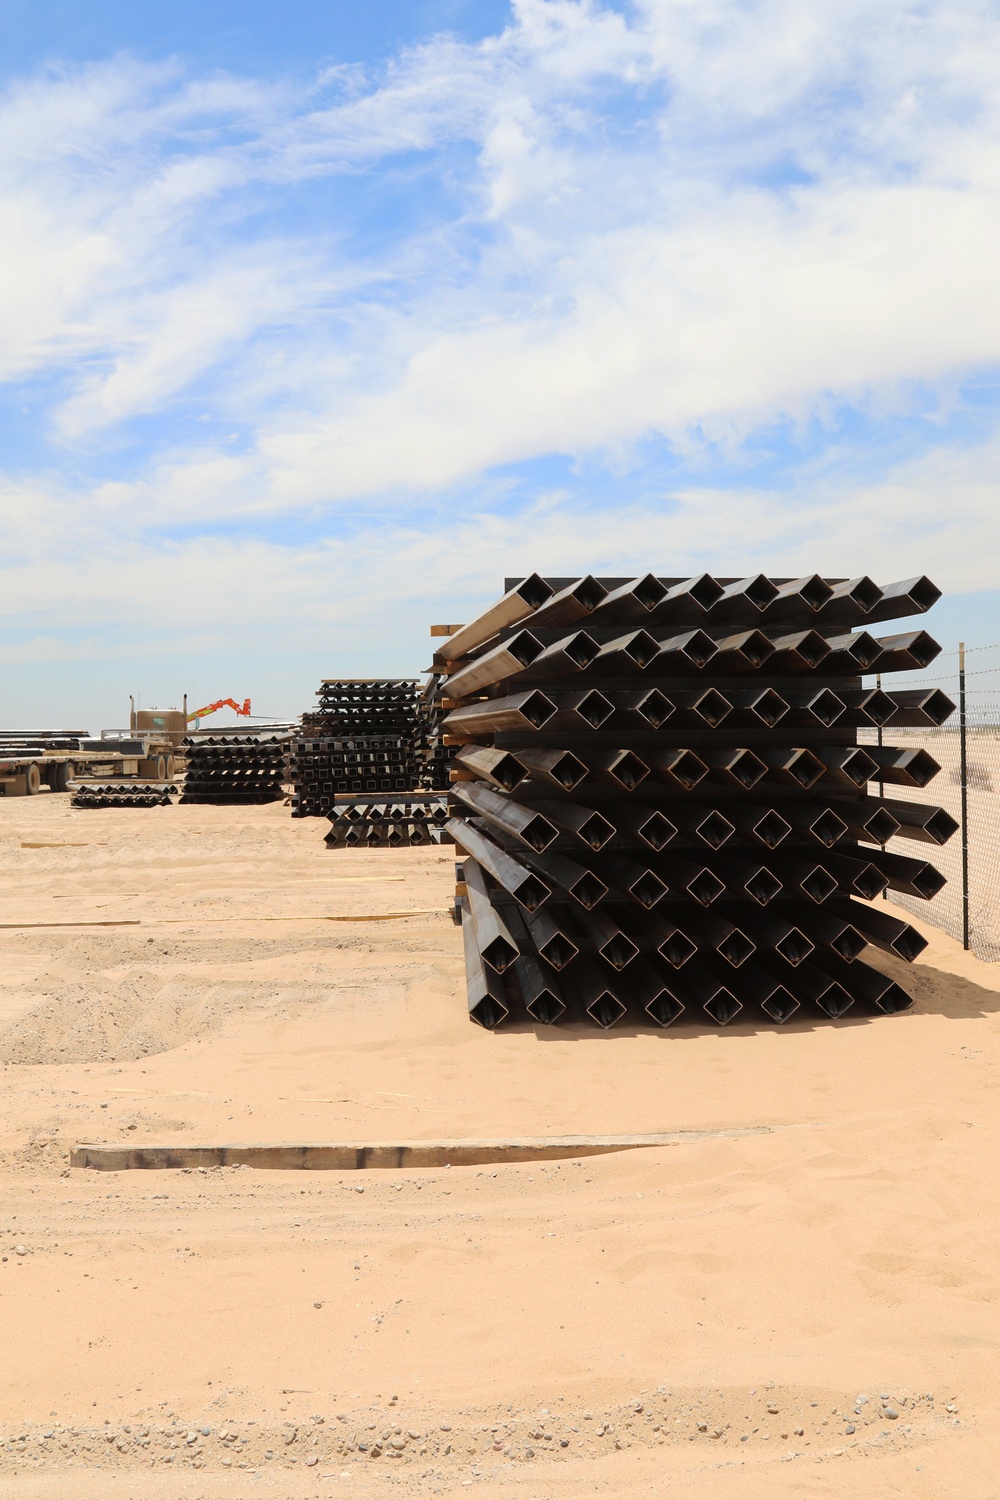 DOD support to DHS-funded Yuma sector border barrier projects